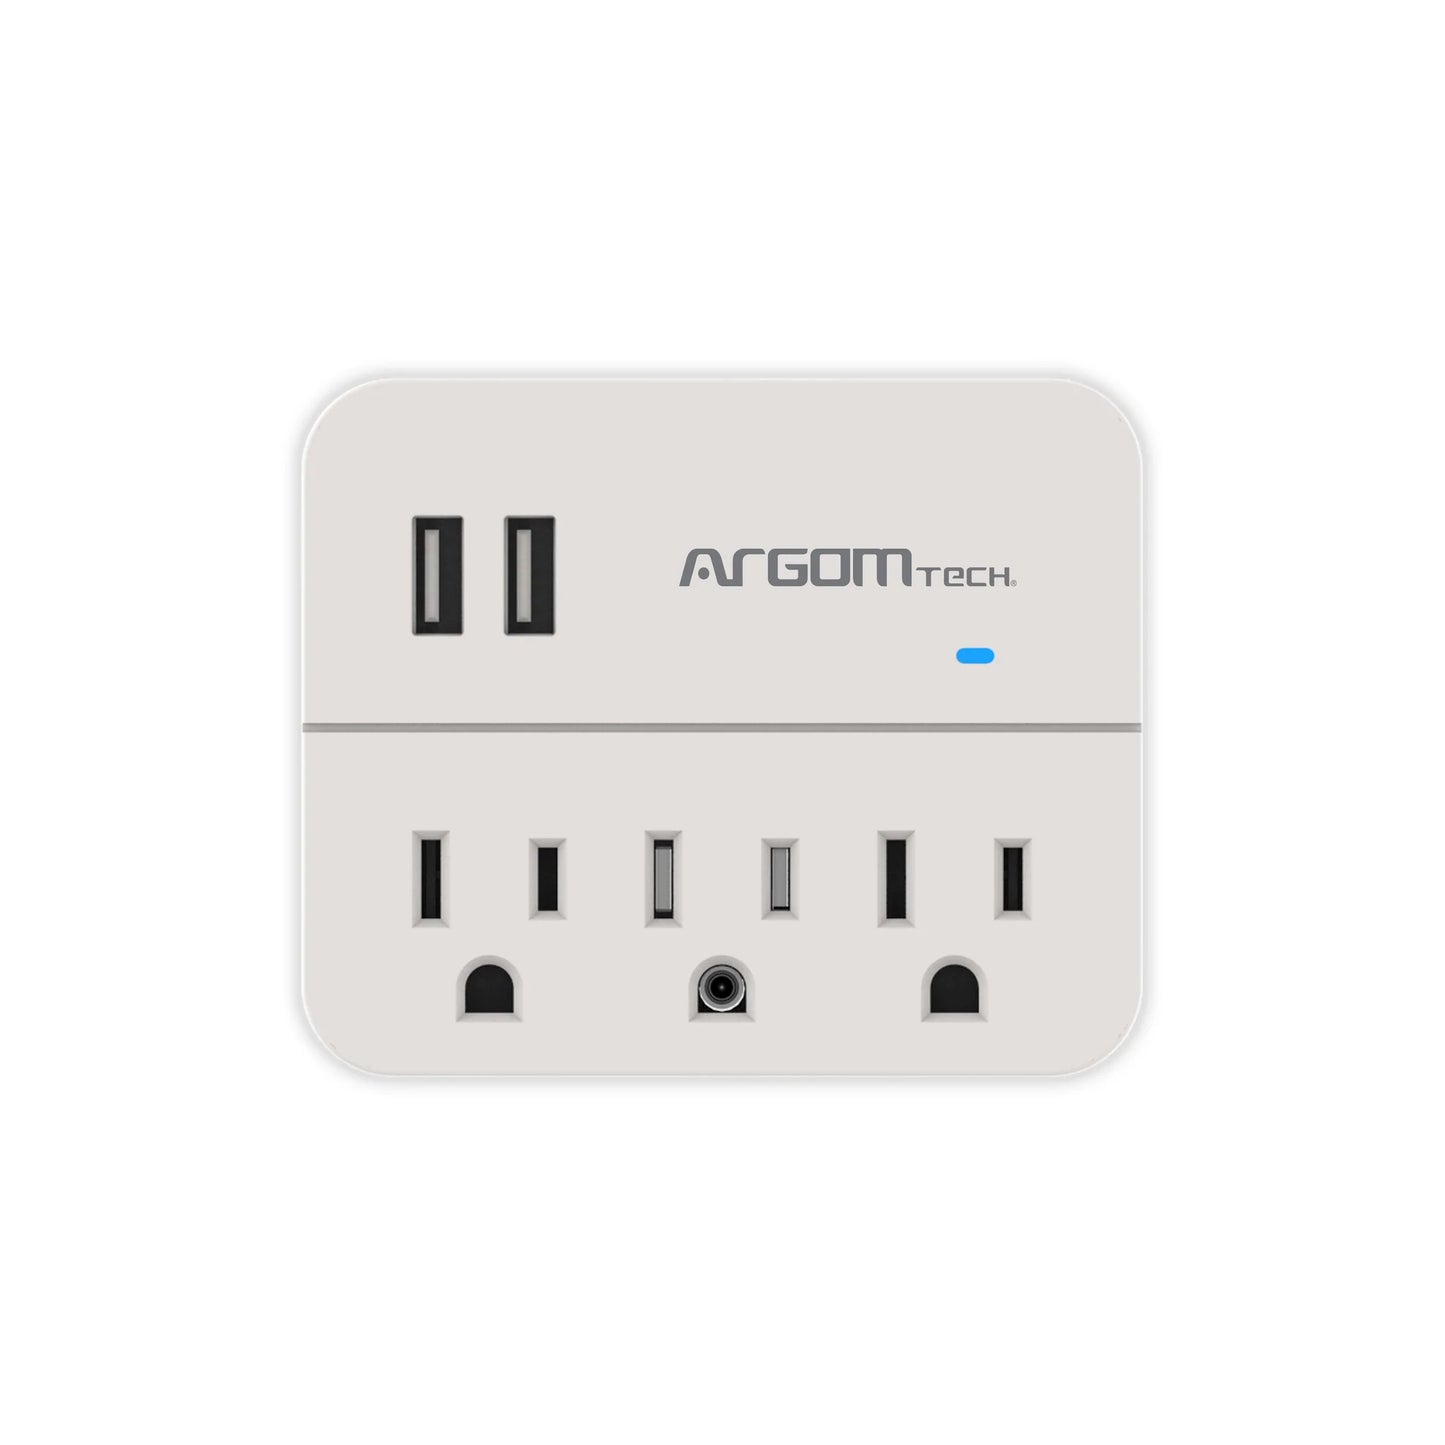 Wall 3-Outlet Adapter with 2 USB Ports Surge Protection. ETL Certification.